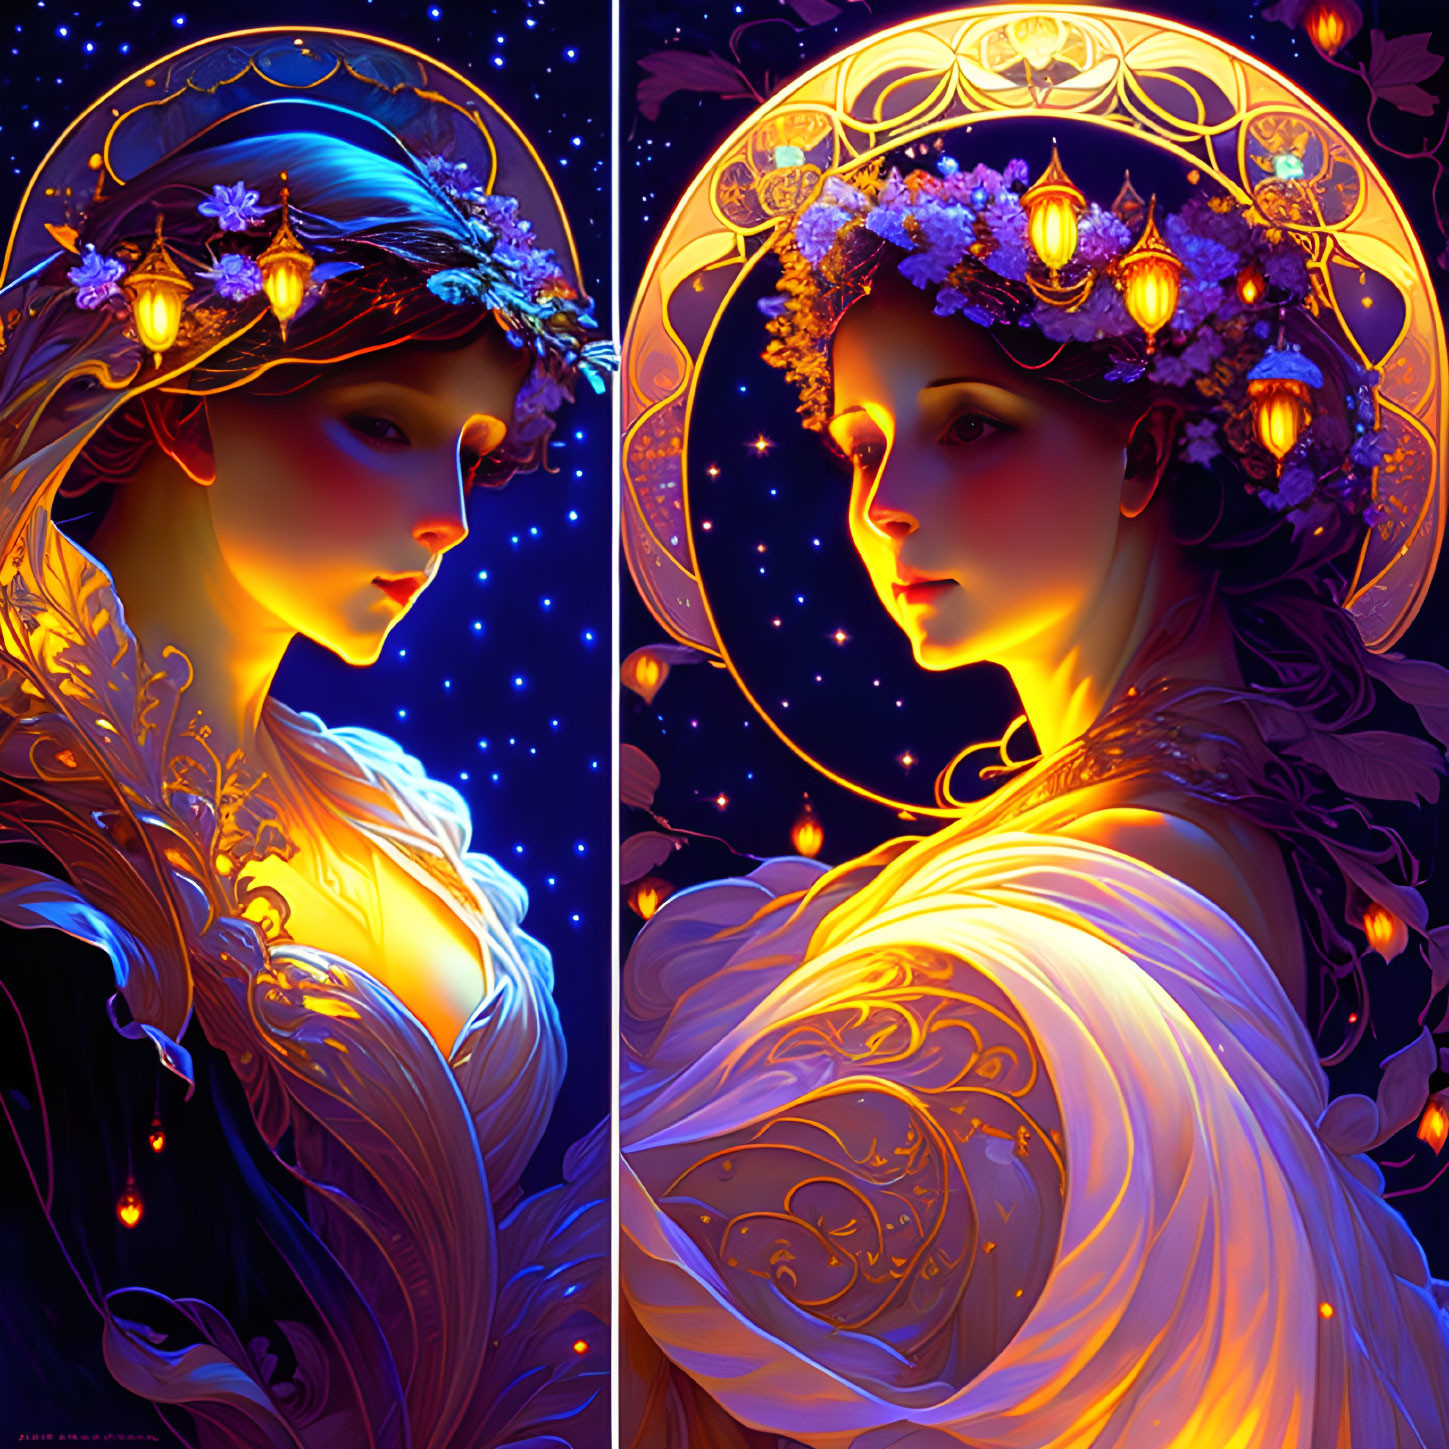 Stylized portraits of women with floral headdresses in blue and orange tones